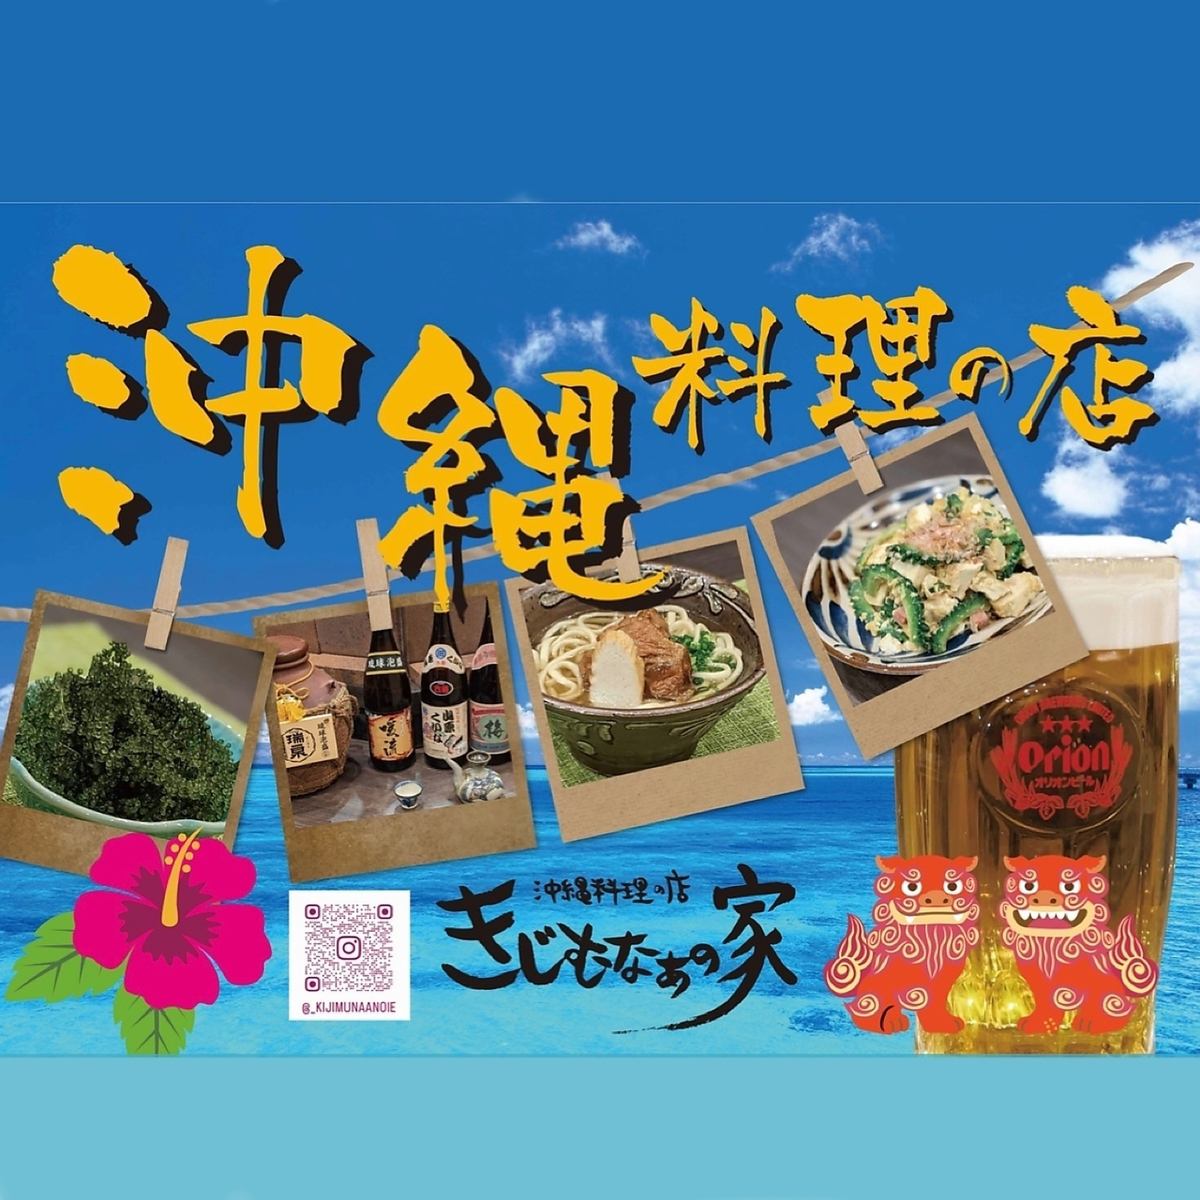 A 2-minute walk from Keisei Chiba Station! You can enjoy Okinawan cuisine! We are waiting for your reservation♪